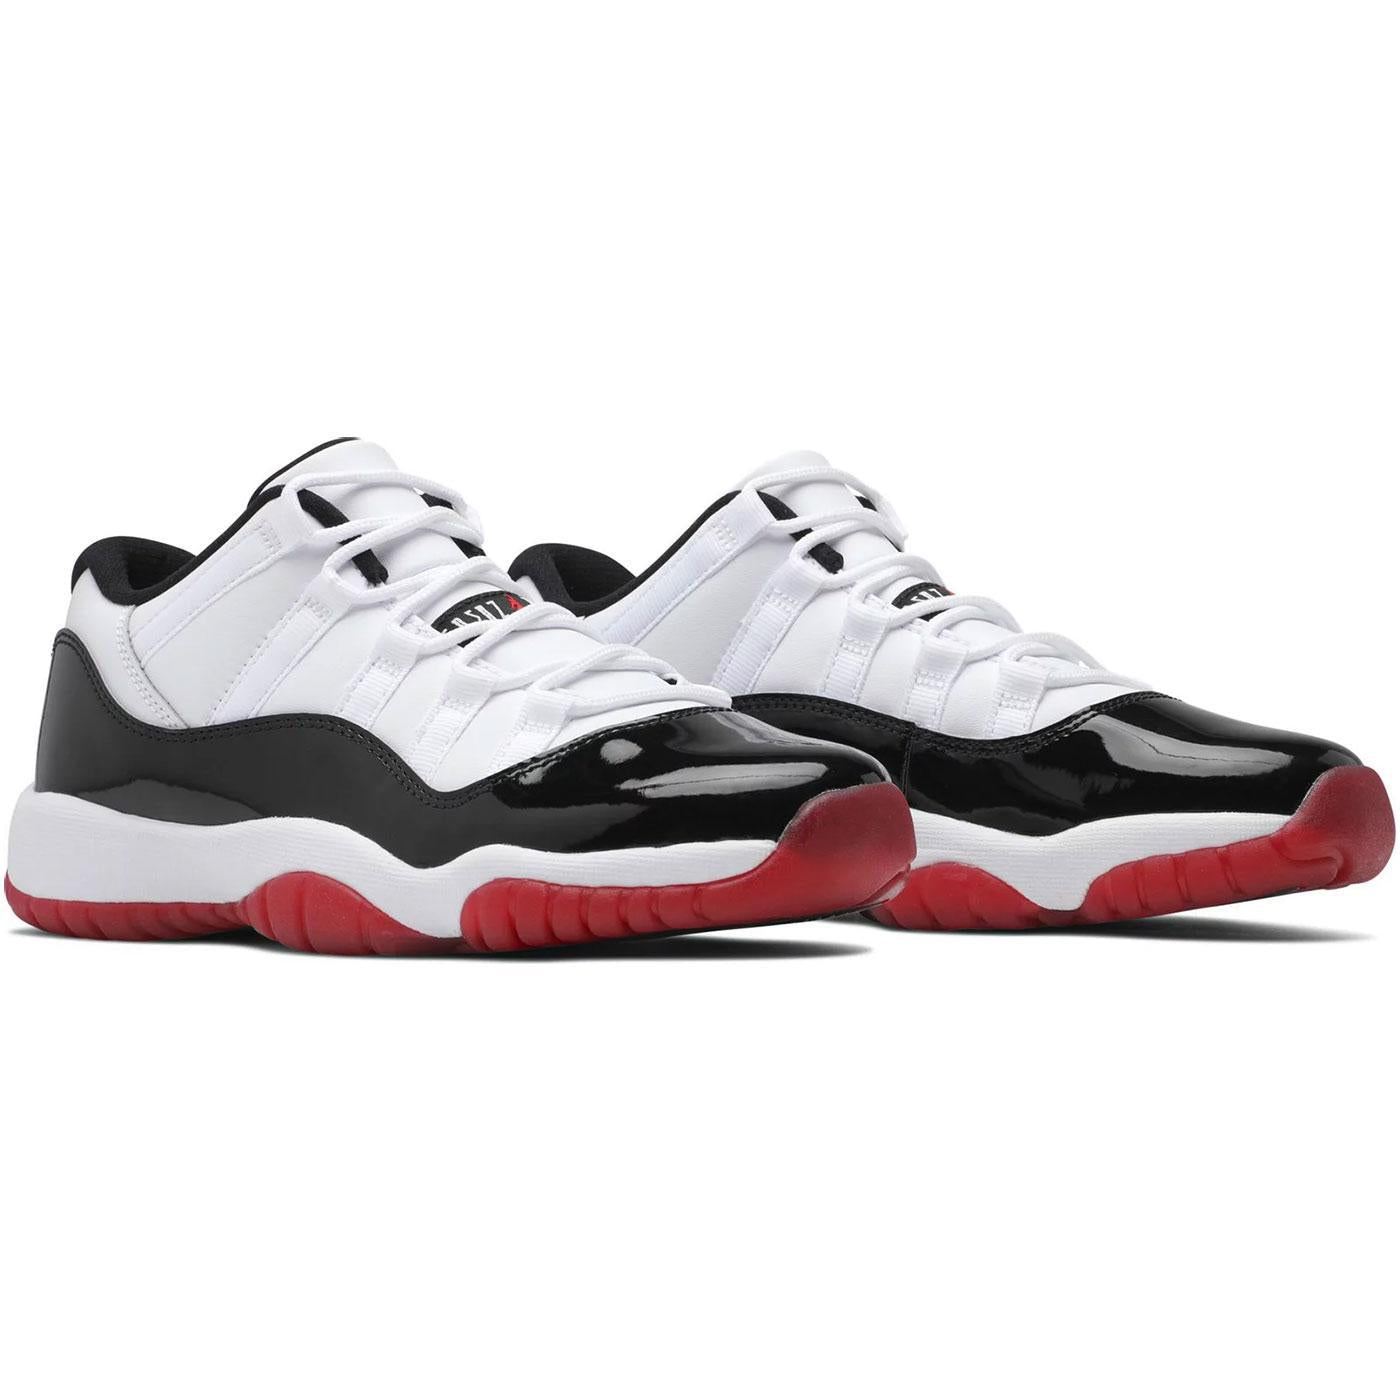 Jordan Youth Air 11 Low GS 528896 160 Concord Bred